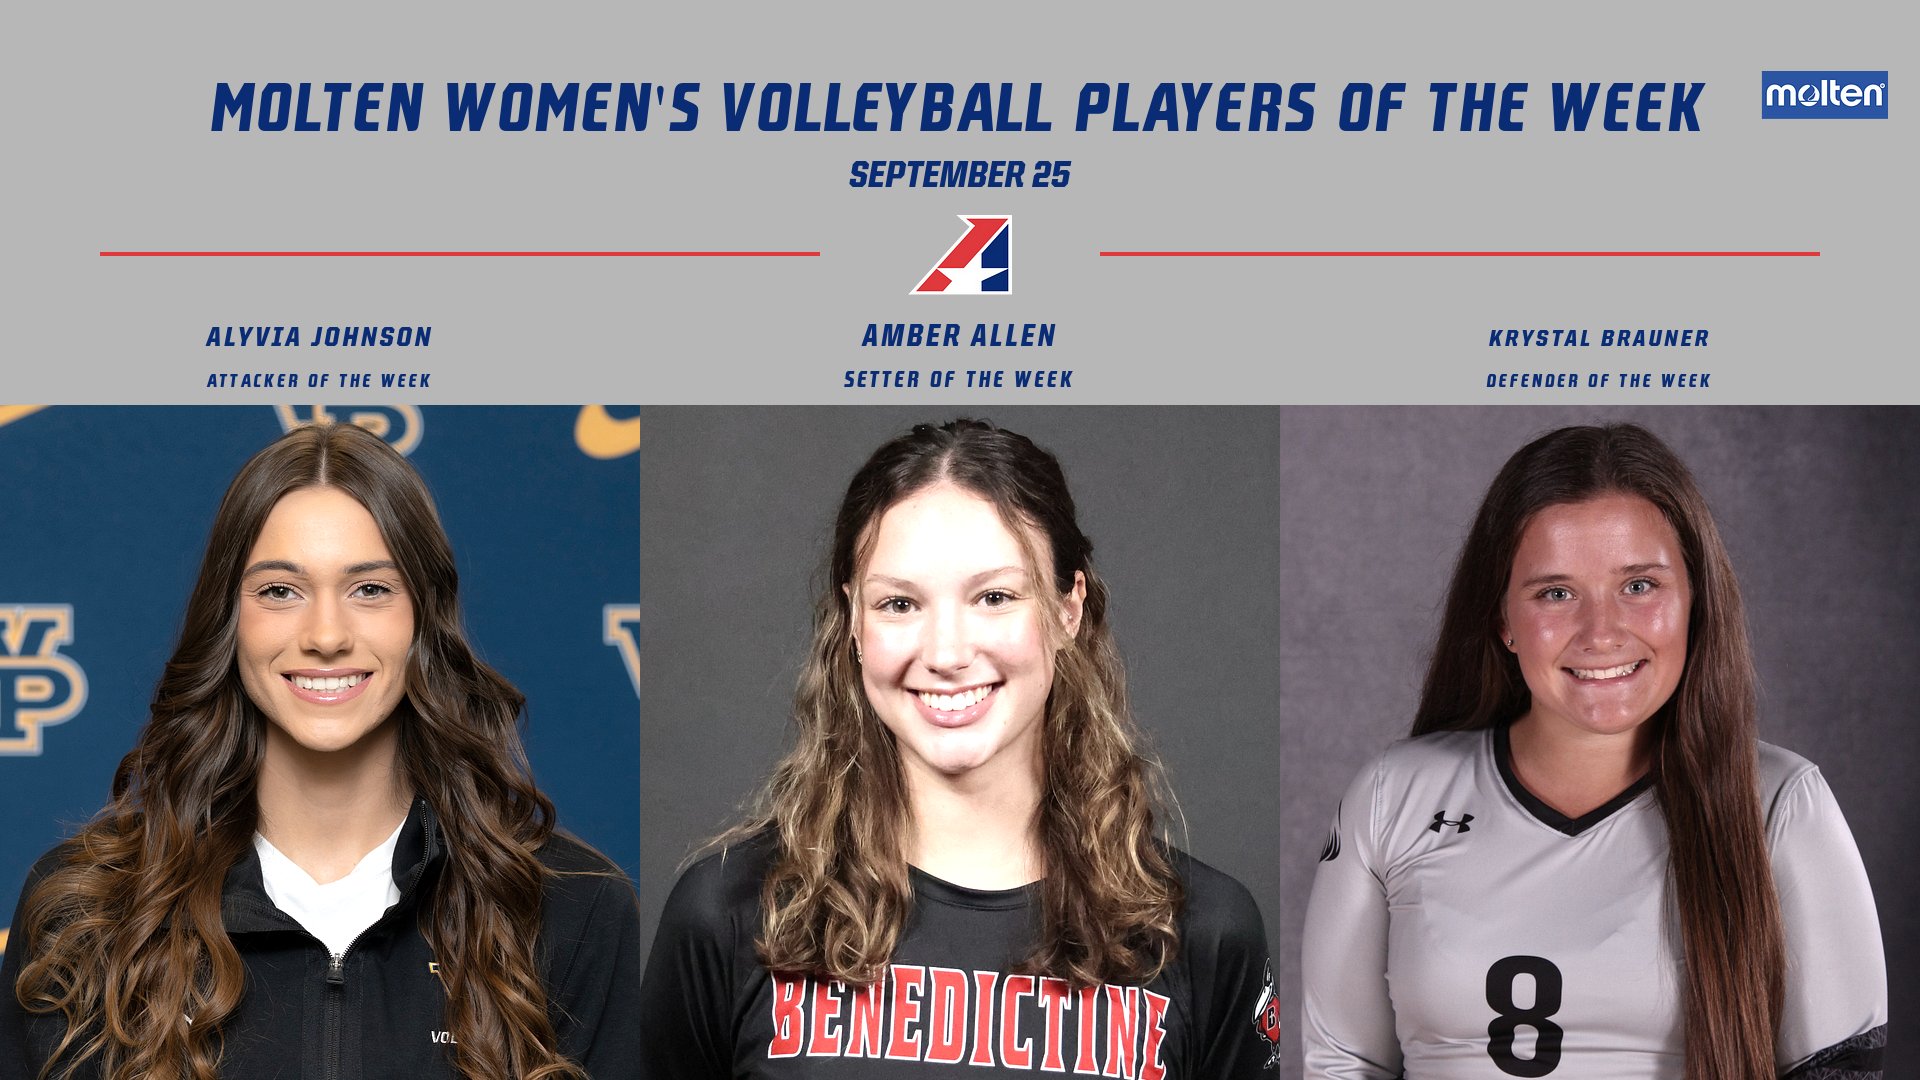 Molten Women’s Volleyball Players of the Week Announced